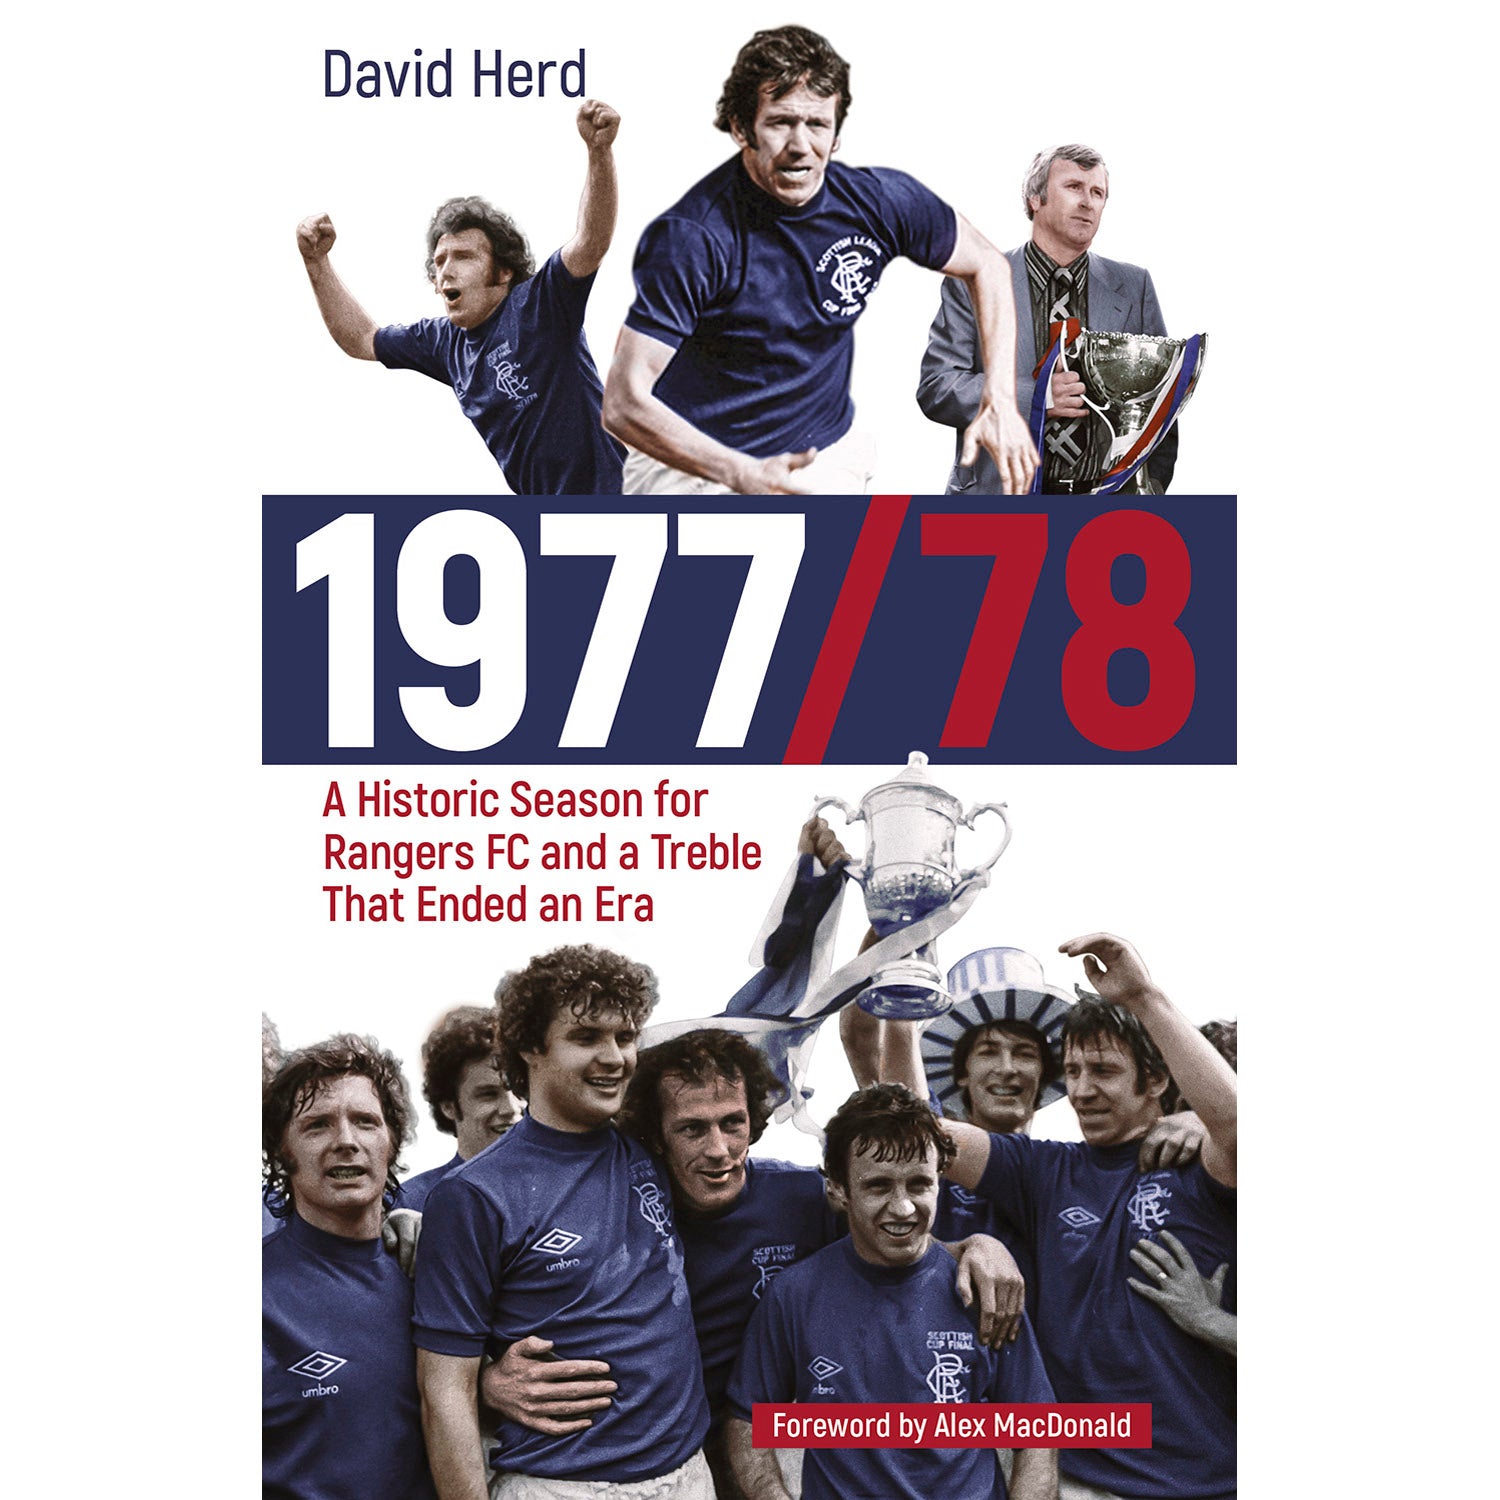 1977/78 – A Historic Season for Rangers FC and a Treble That Ended an Era